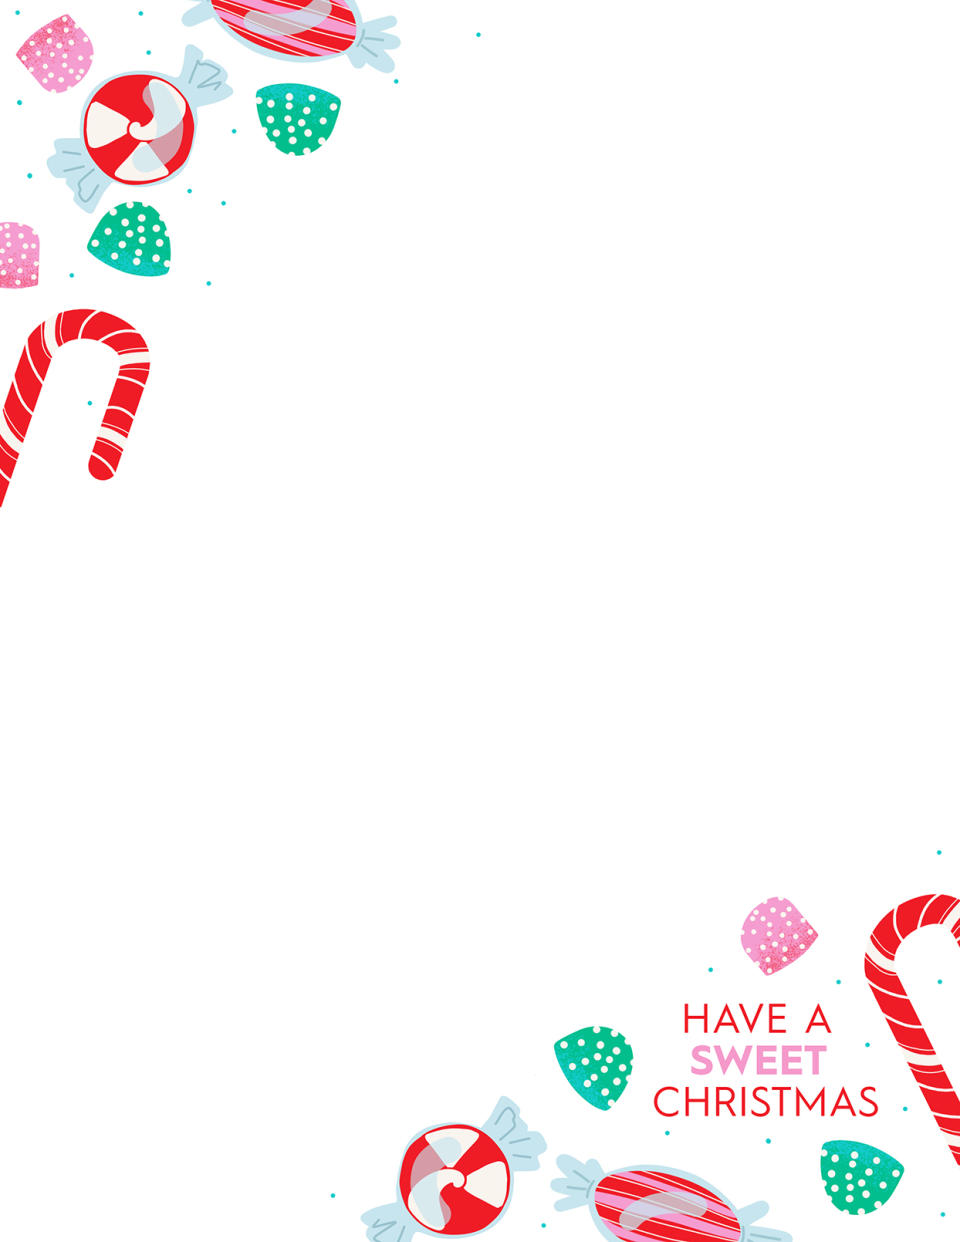 33 Free Christmas Letter Templates To Help You Send Holiday Cheer